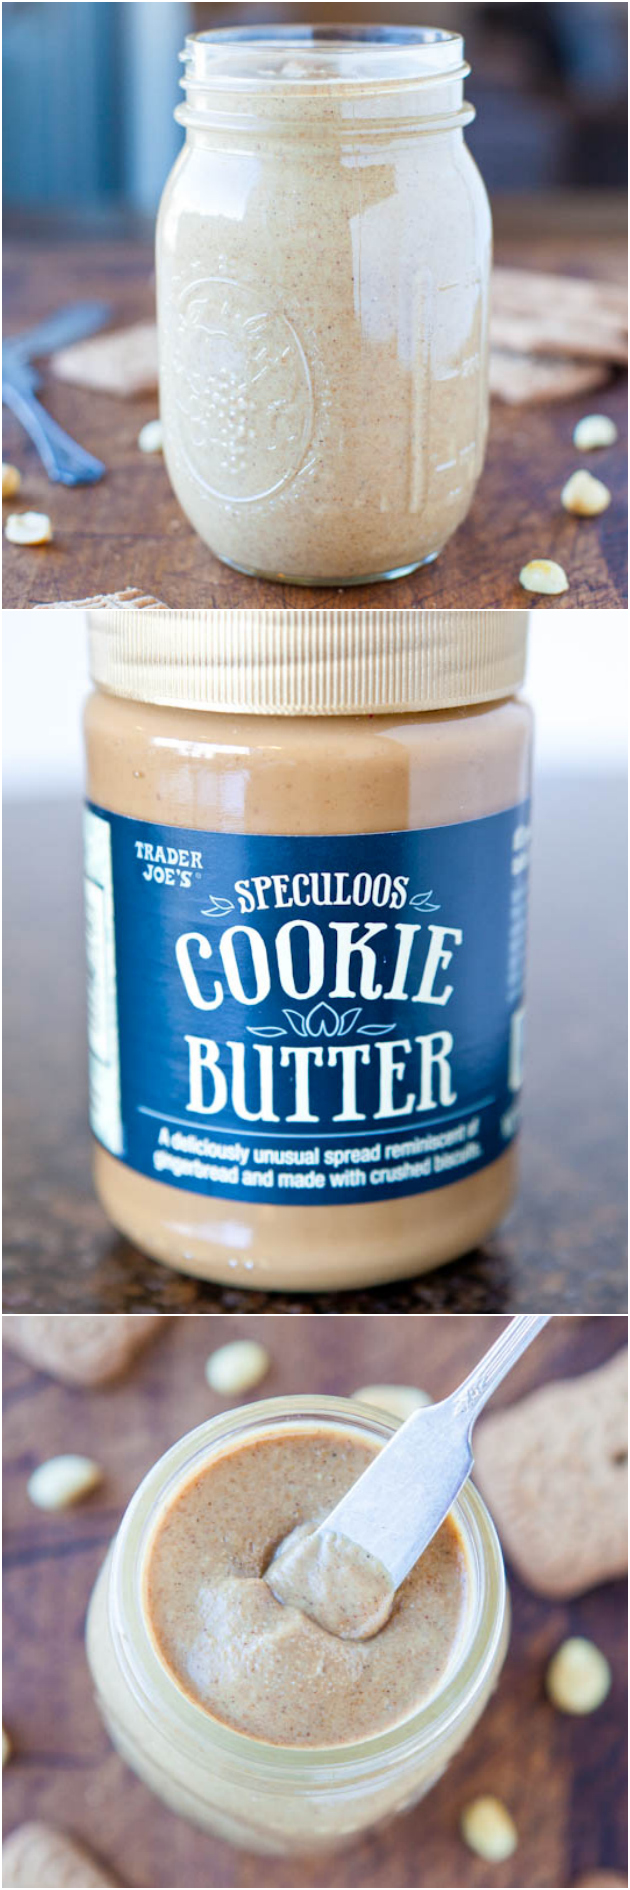 Homemade Cookie Butter Peanut Butter - Want to make your own Cookie Butter (or Biscoff)? Now you can in 10 minutes & it's so easy!